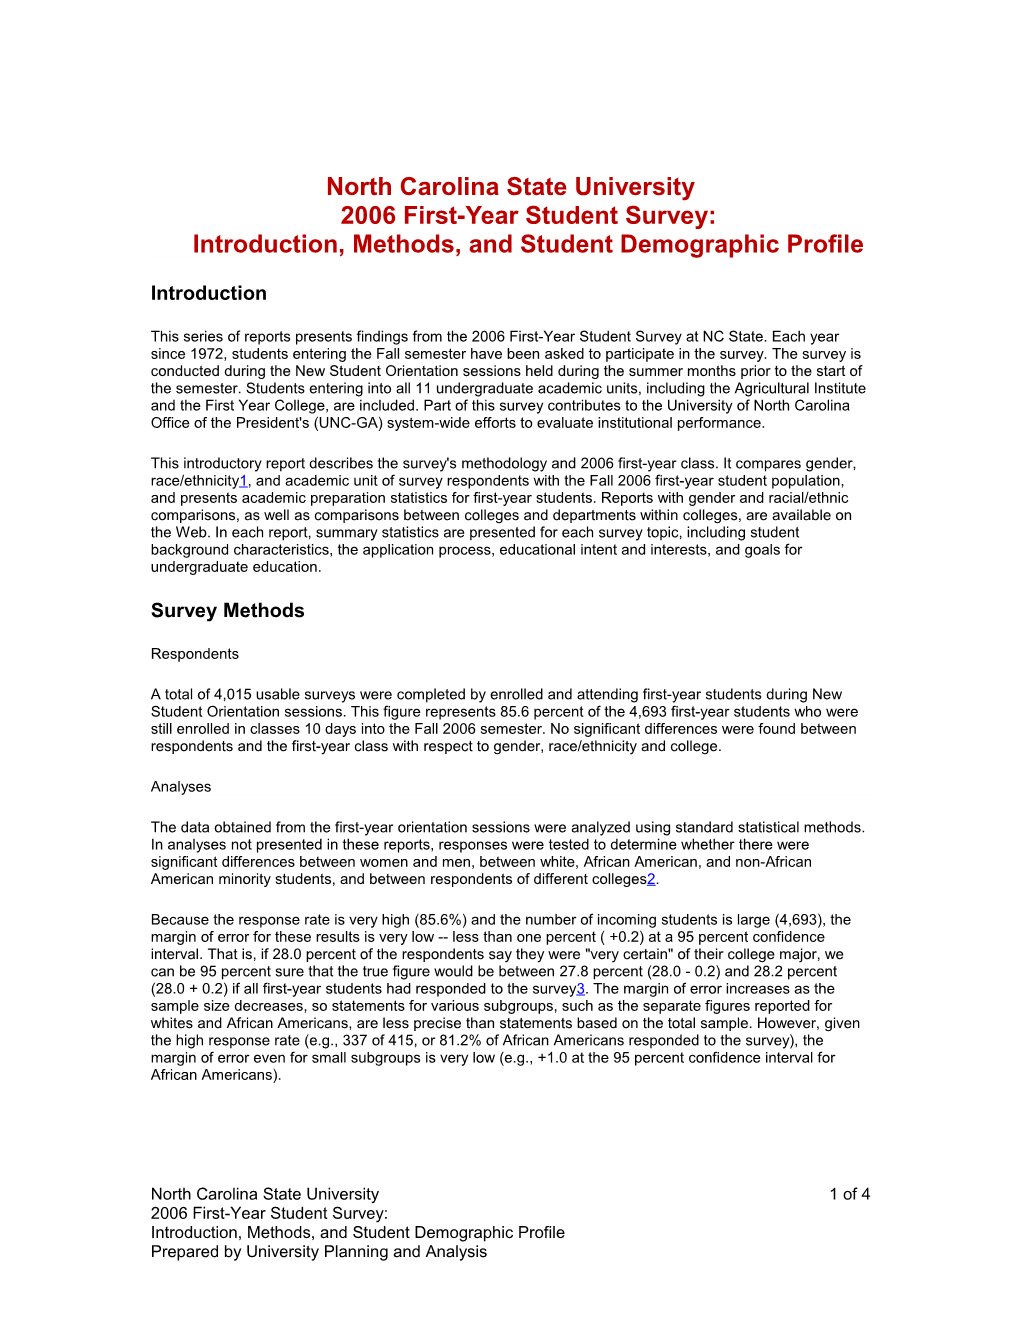 2006 First-Year Student Survey: Introduction, Methods, and Student Demographic Profile